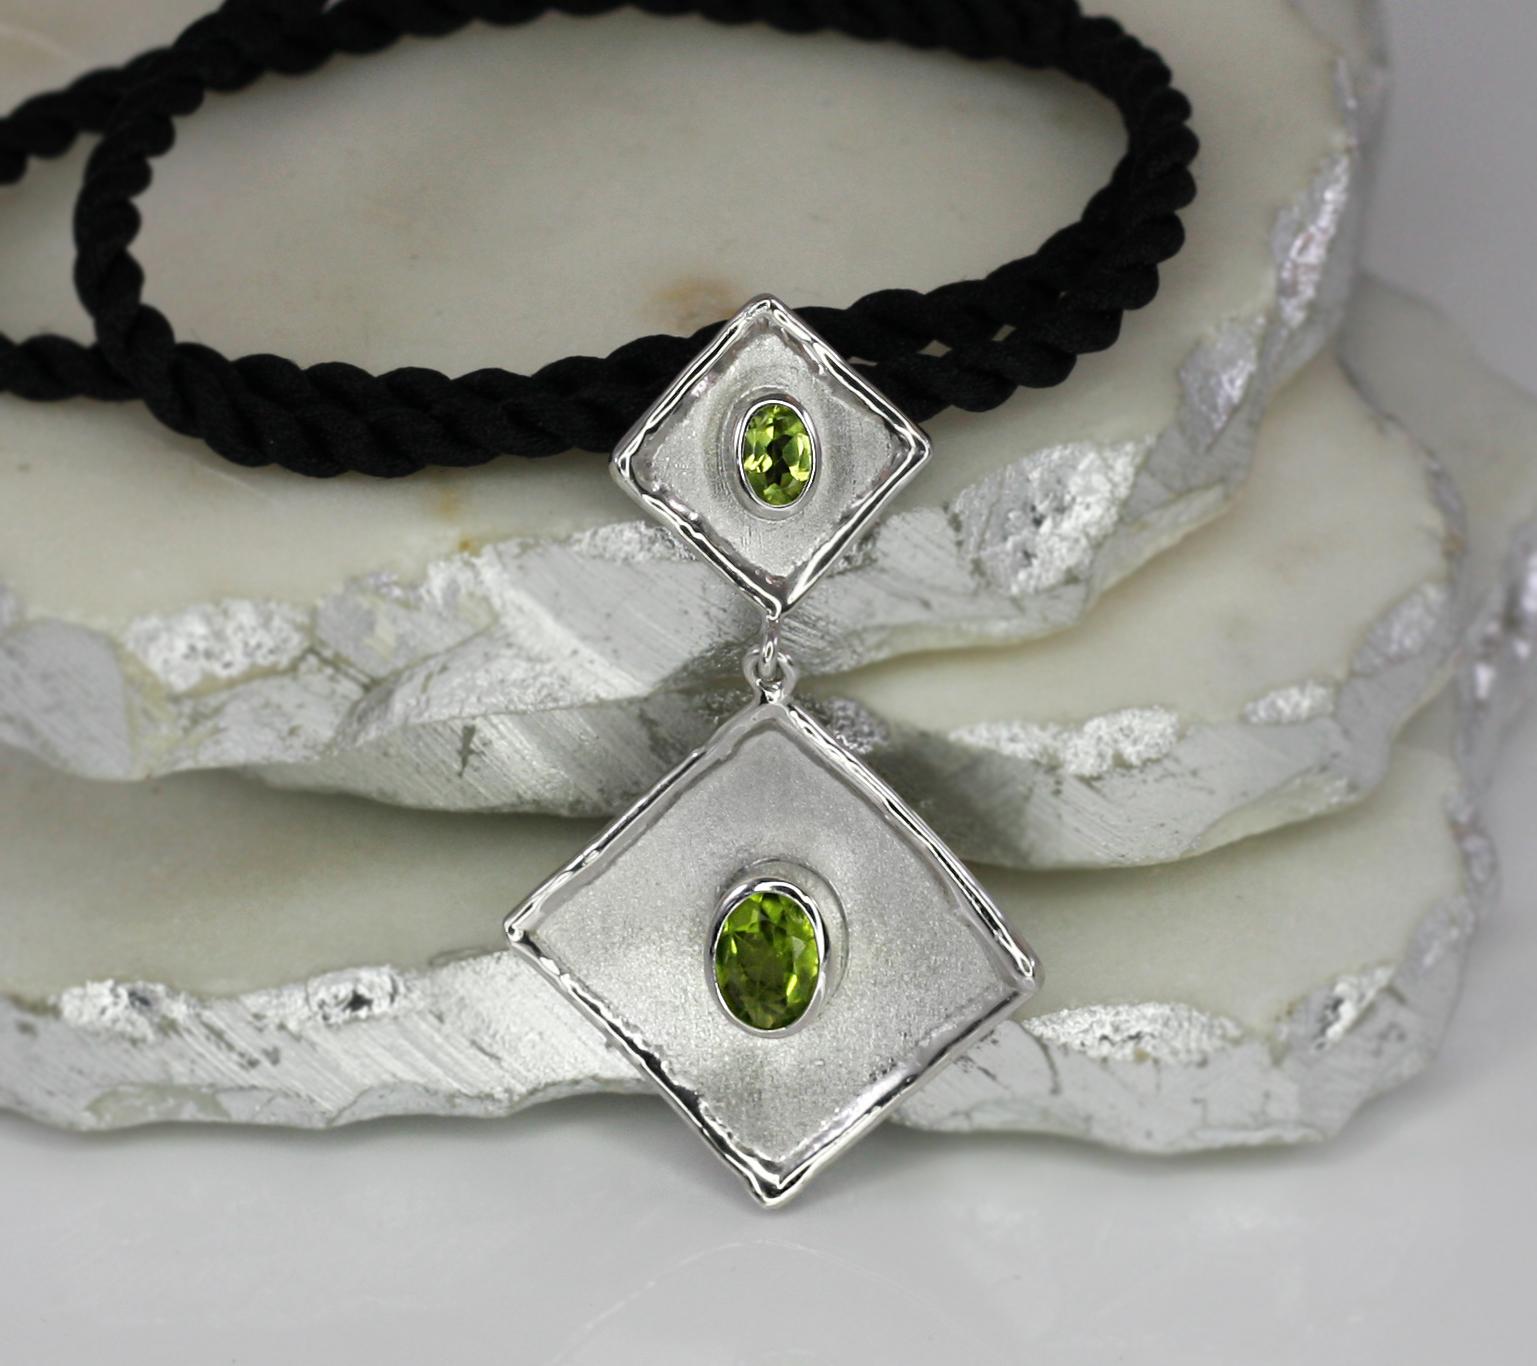 Yianni Creations fine silver 950 purity plated with palladium pendant necklace from Ammos Collection crafted in Greece and features 2.0 Carat oval cut Peridot. 
The gorgeous unique look of this enhancer is created by combining two techniques of